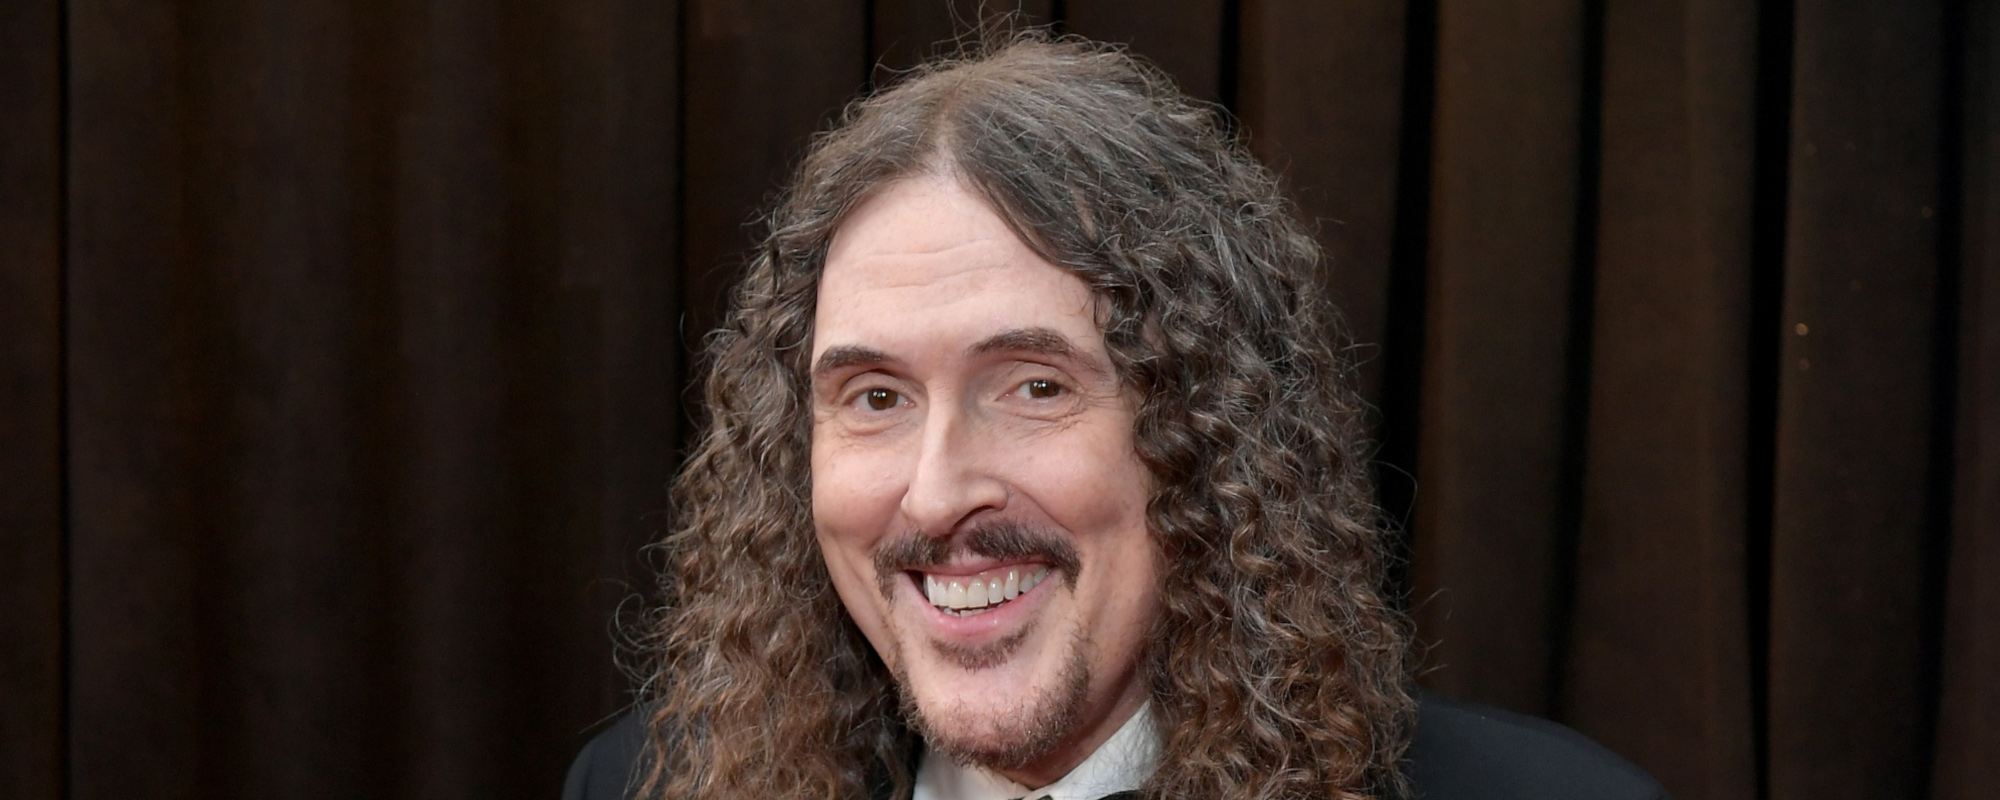 Watch: The New Trailer For ‘Weird: The Al Yankovic Story’